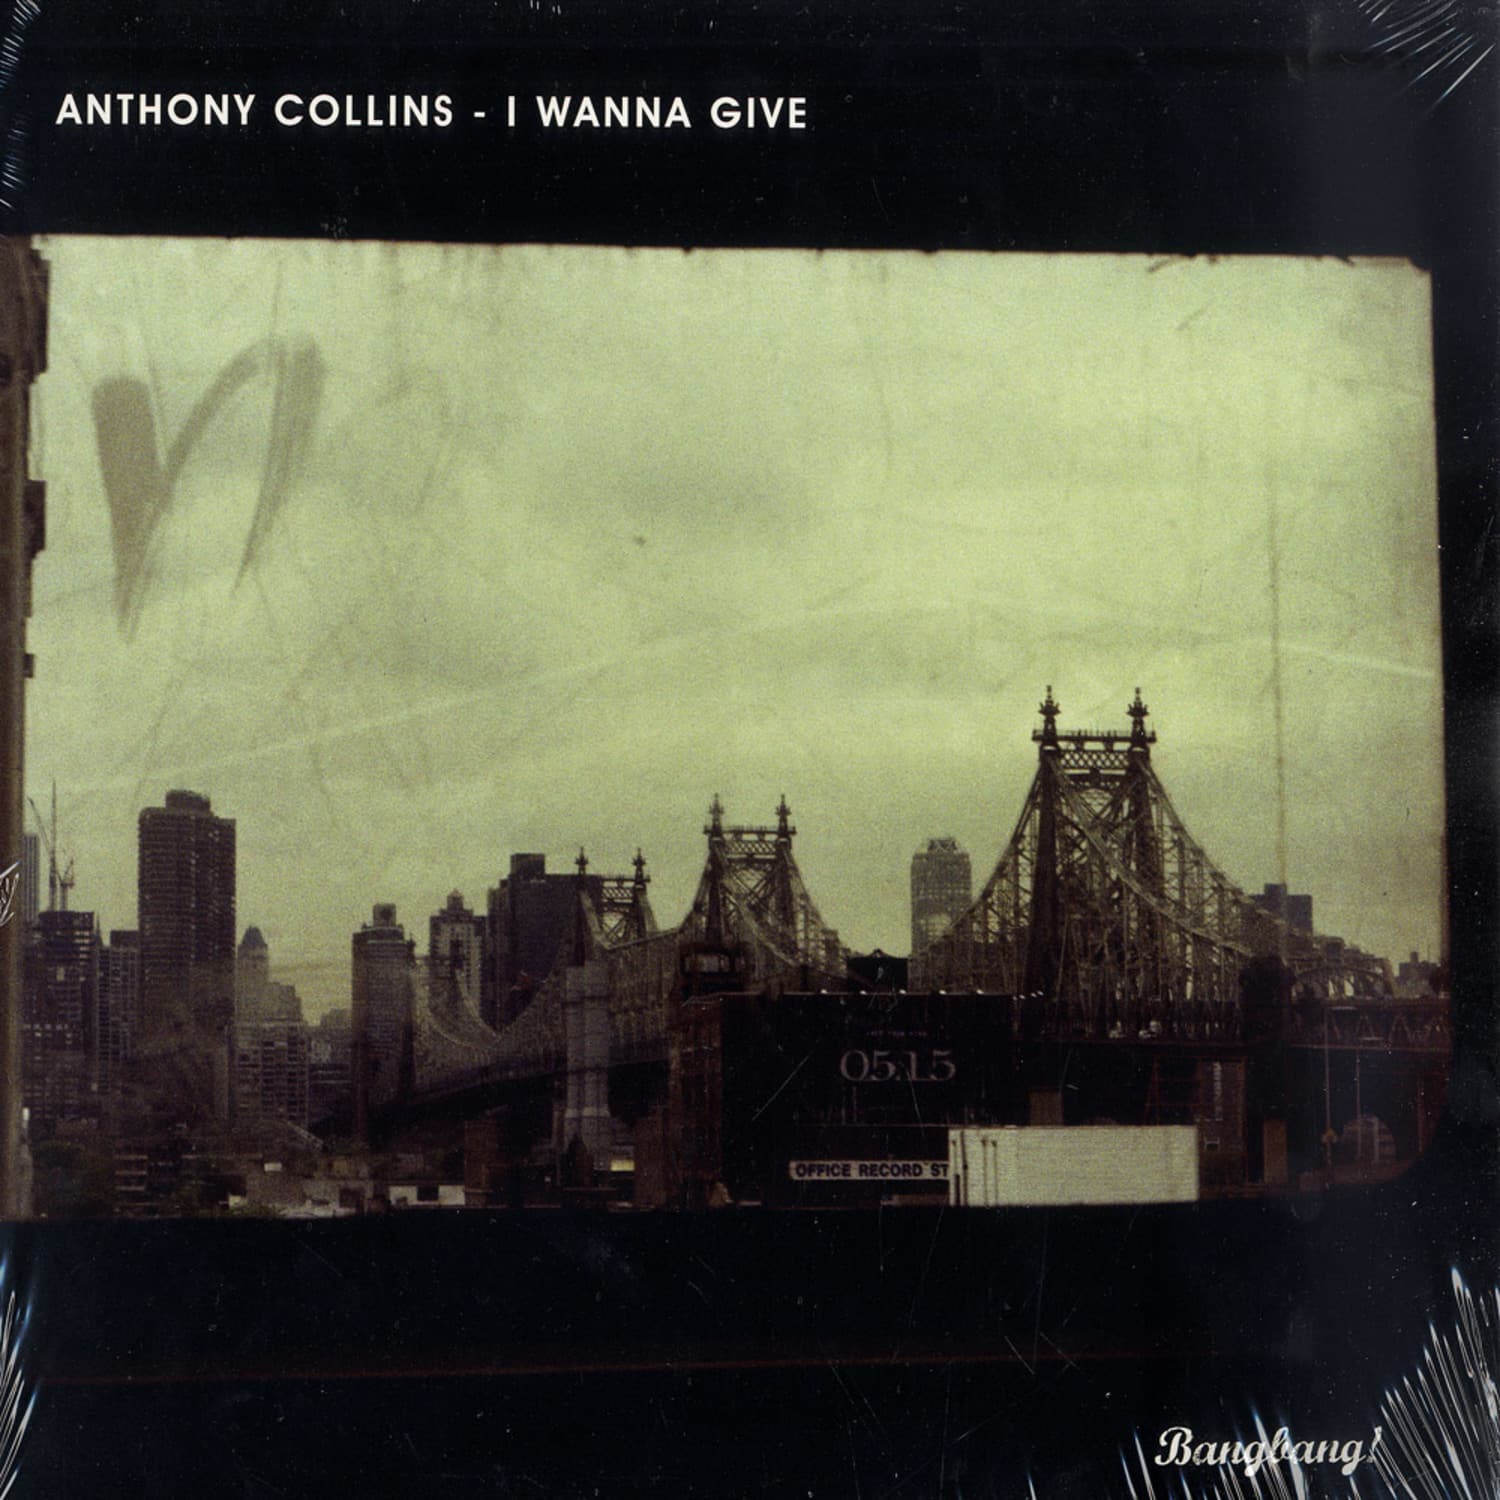 Anthony Collins - I WANNA GIVE